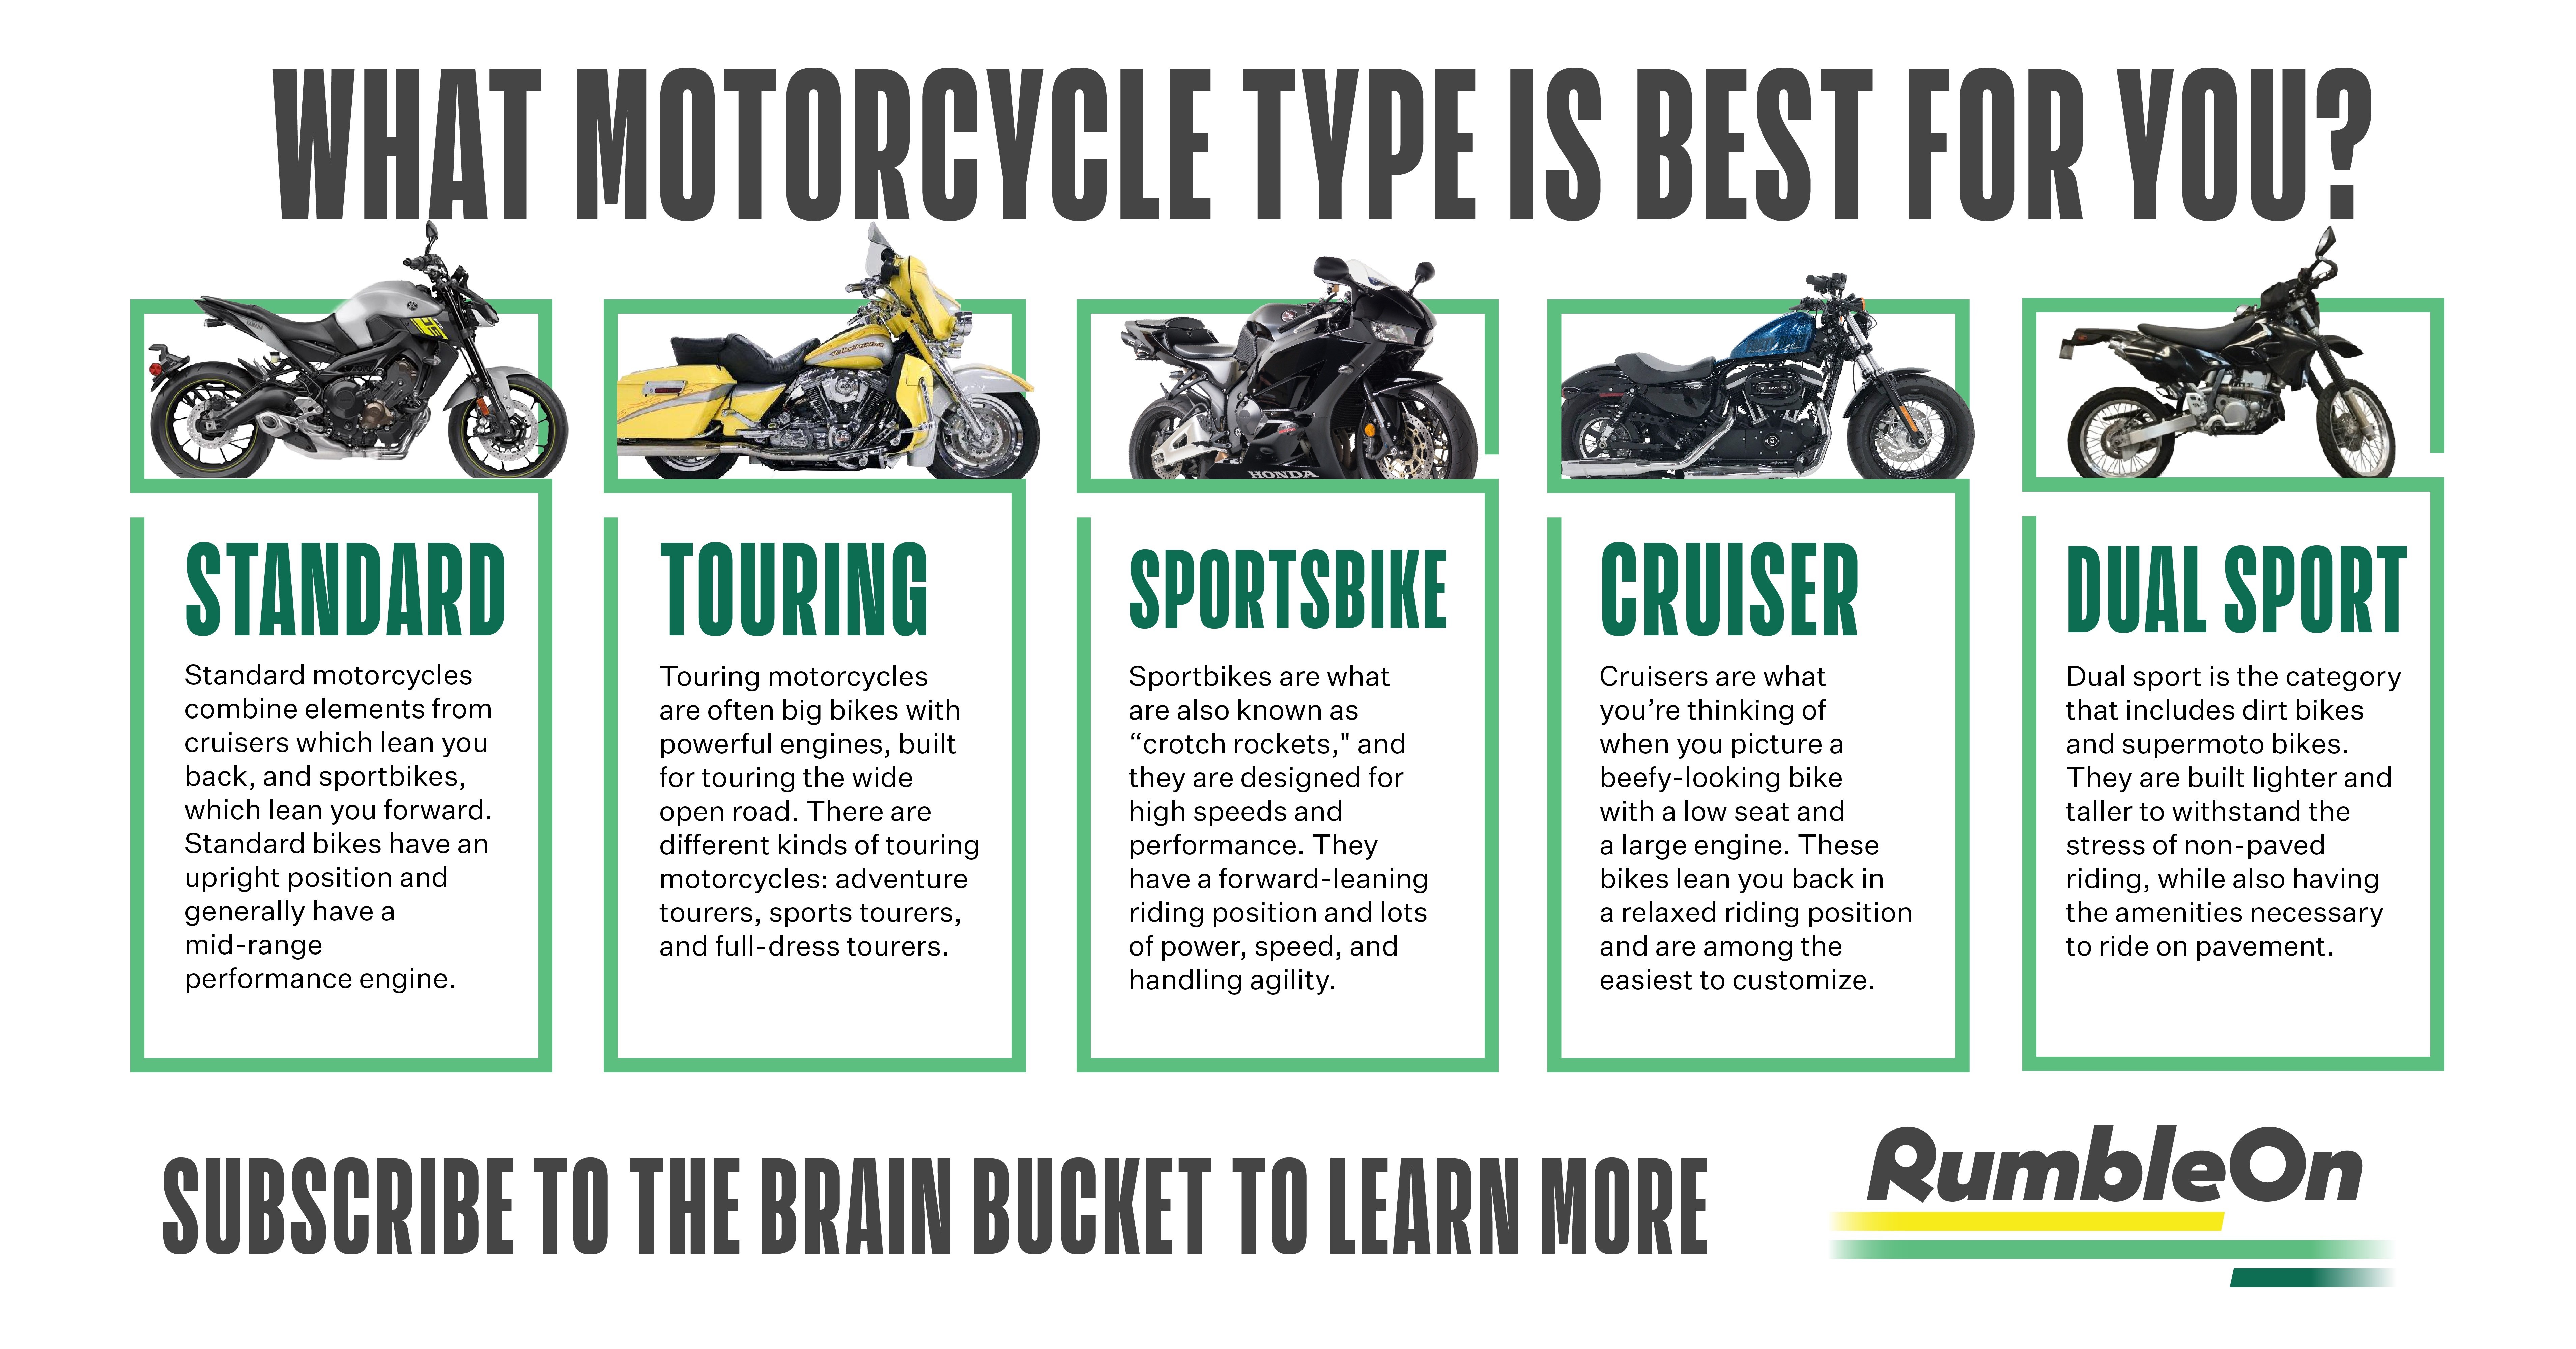 Which motorcycle type is best for you